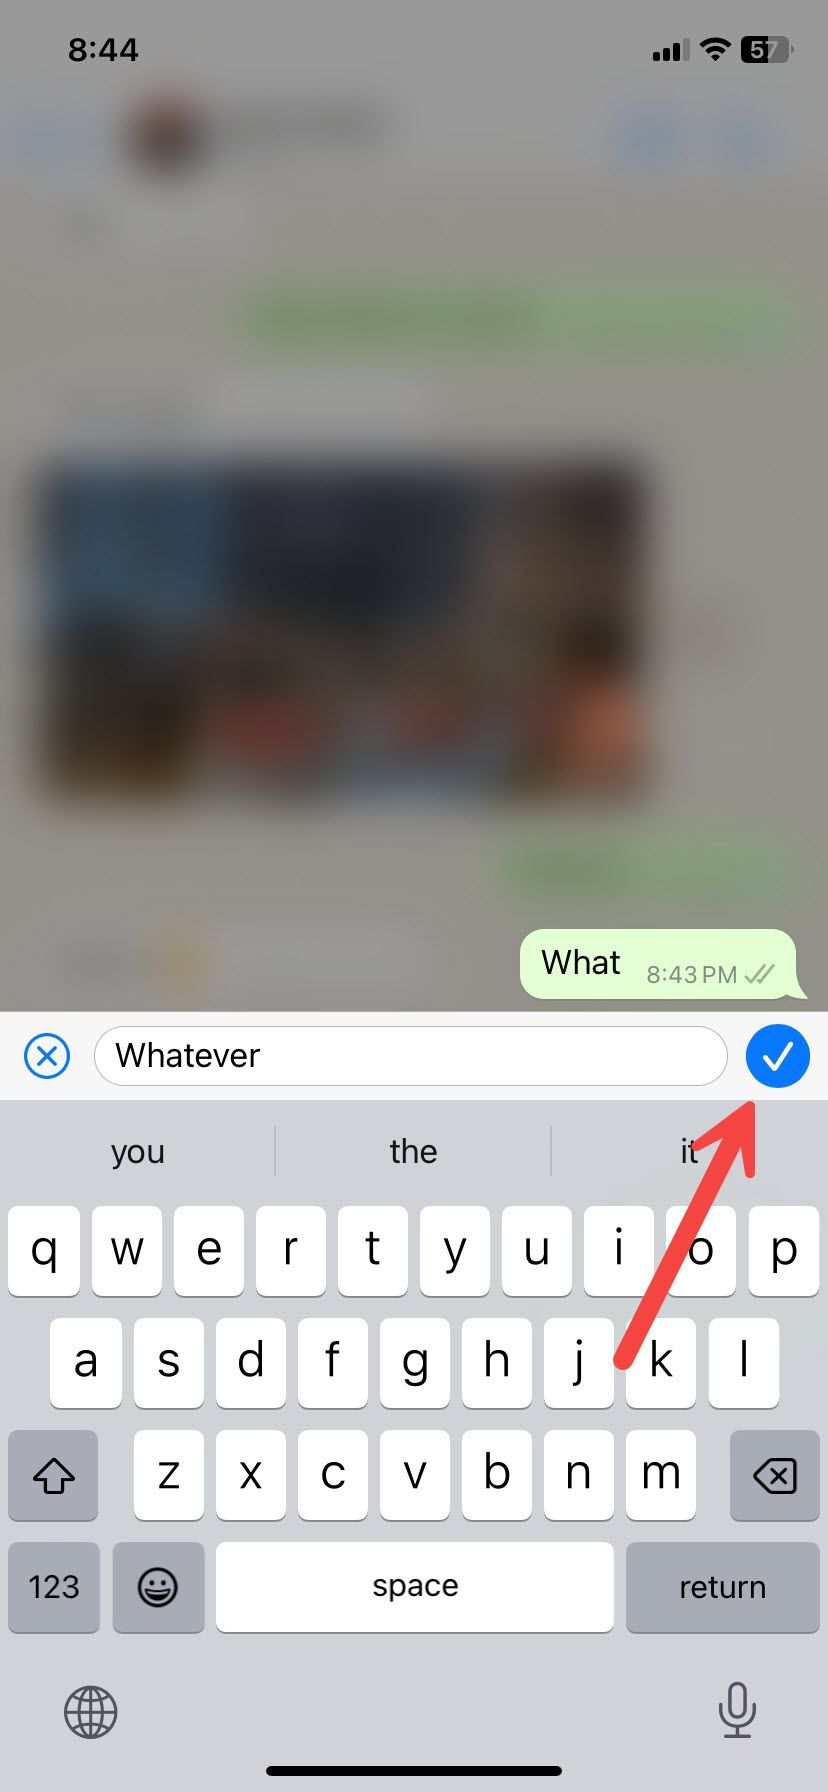 confirm an edited message on whatsapp